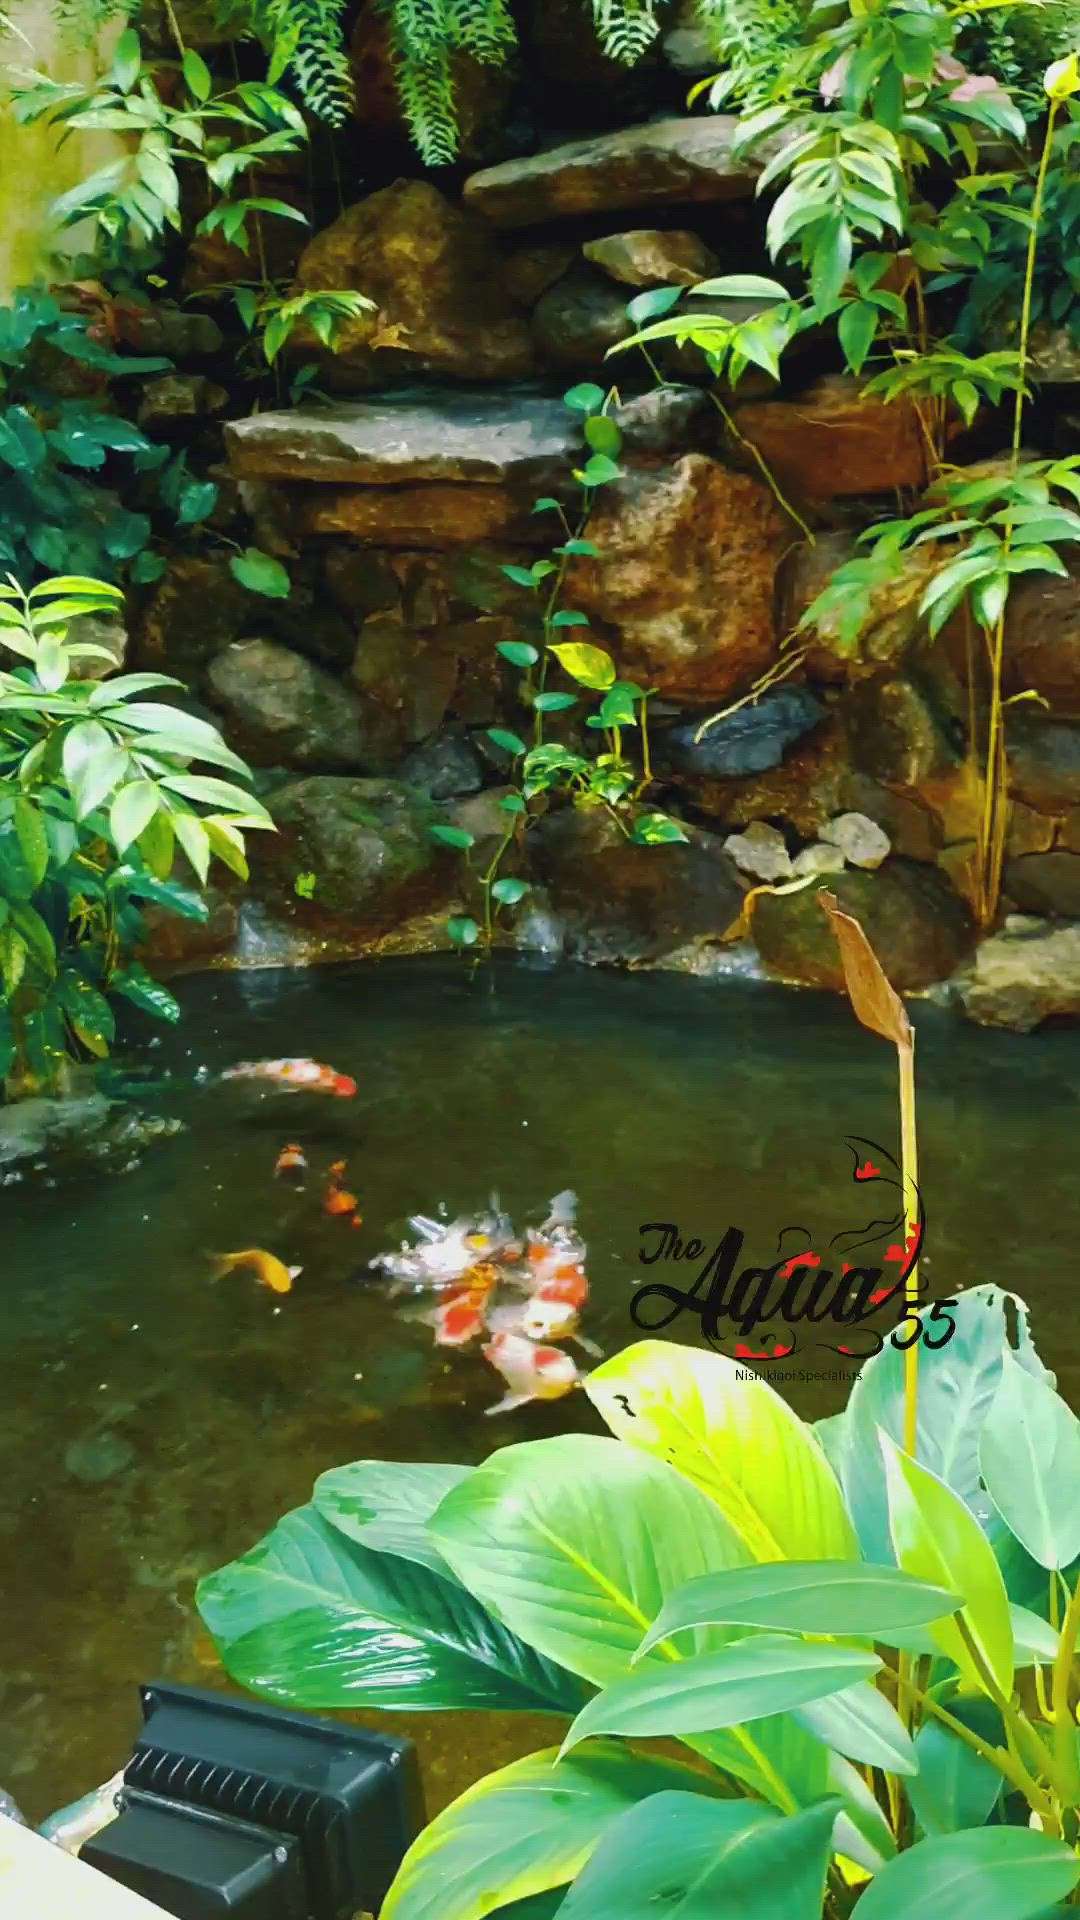 Beautiful indoor koi pond for our Tirur client. An abandoned was resetted to this beautiful condition.
8547483891 -- ring me for works

 #koifish  #koipond  #japanese  #japanesekoi  #filtration #koipondfiltration #site #garden #indoorplants #indoorkoipond #oscar_fish  #freshwater_longest_fish  #oscar_fish  #discuss_fish #fish